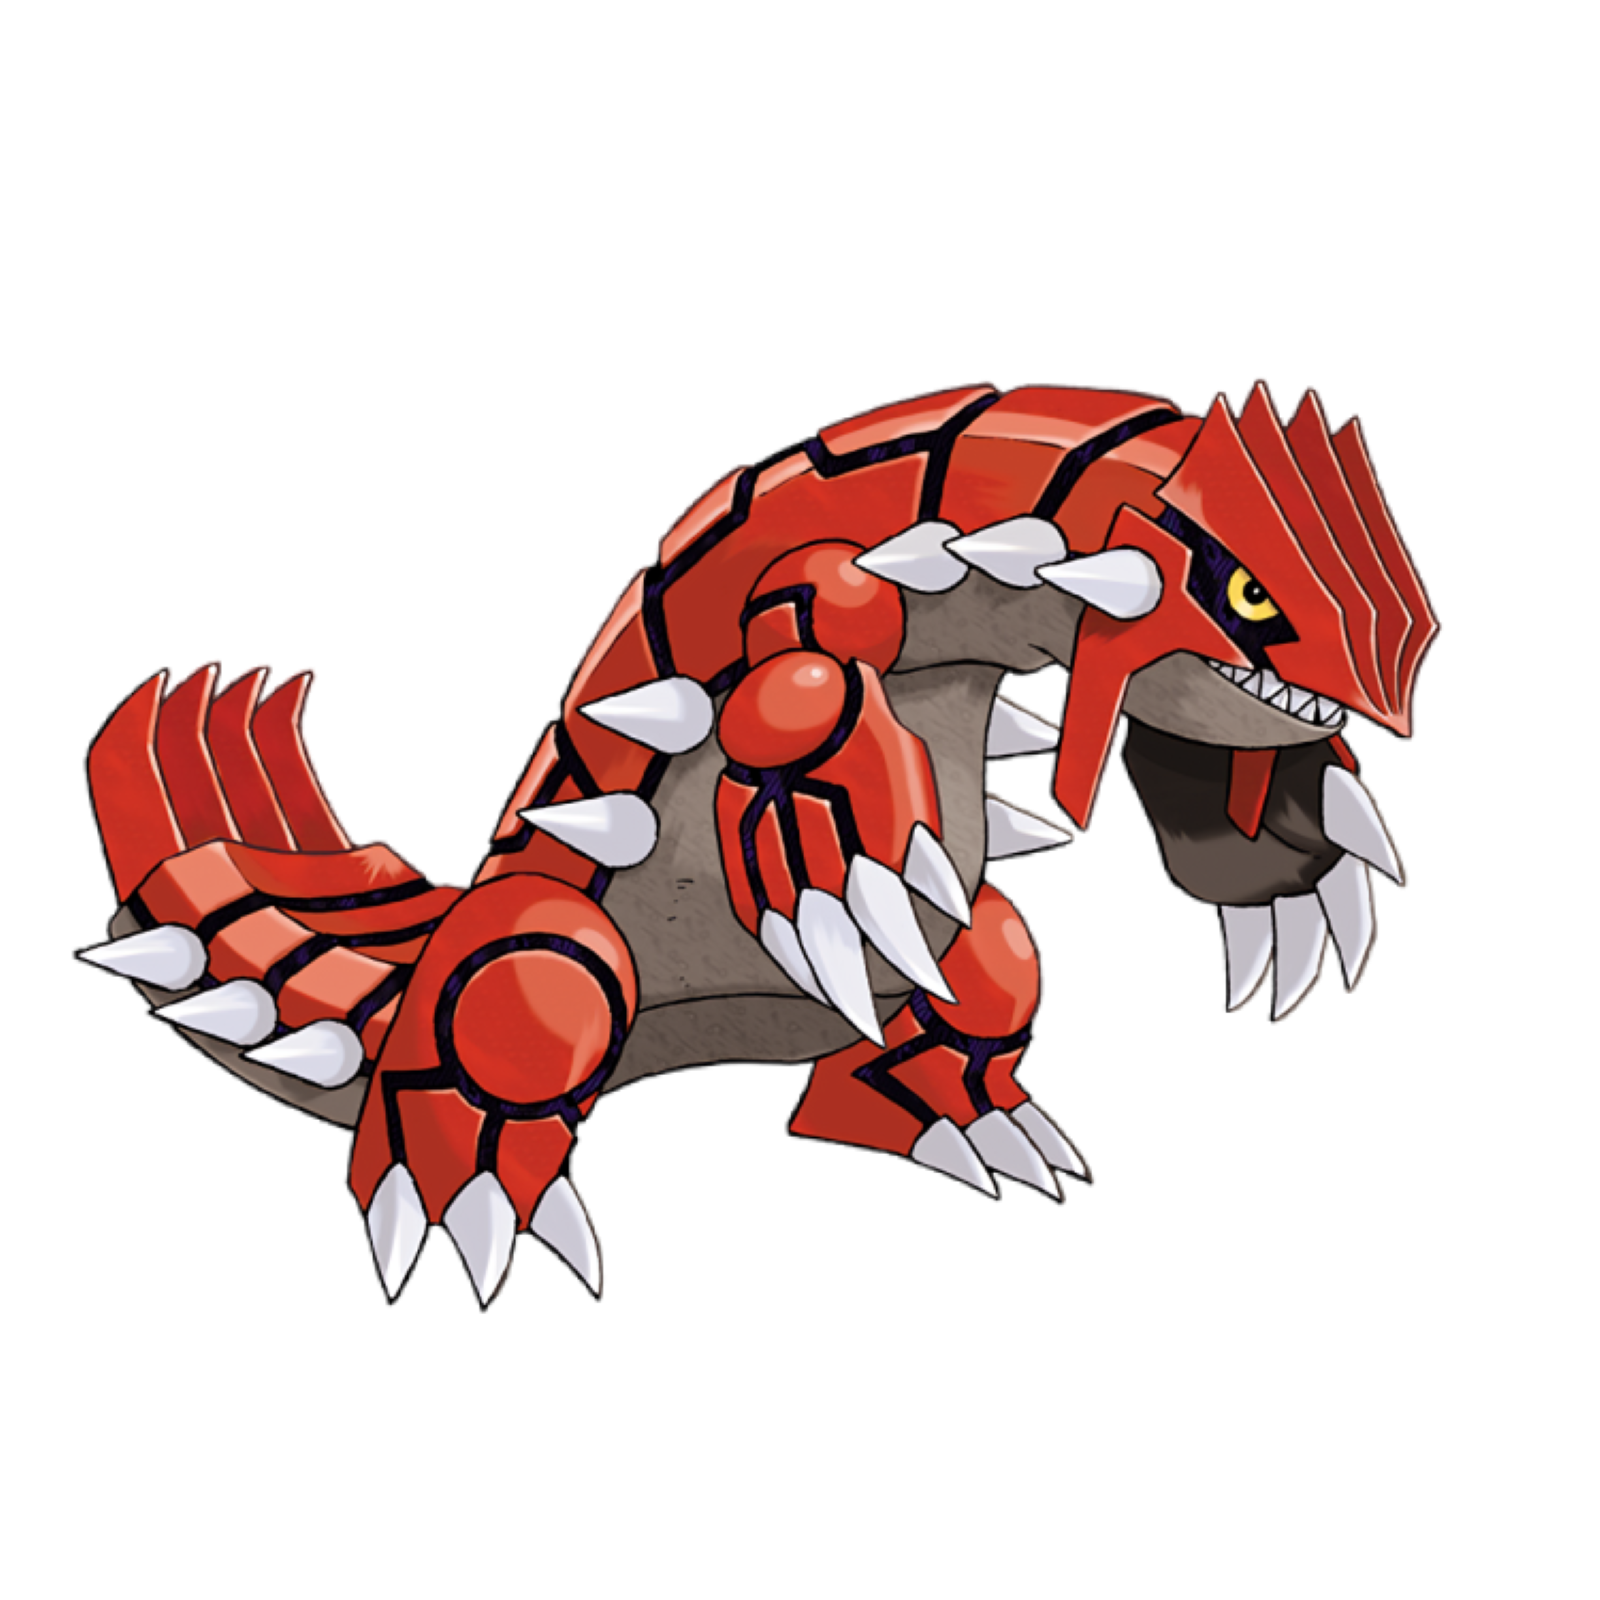 How to get the Mythical Legend Genesect in Pokémon XY & ORAS Tutorial. 